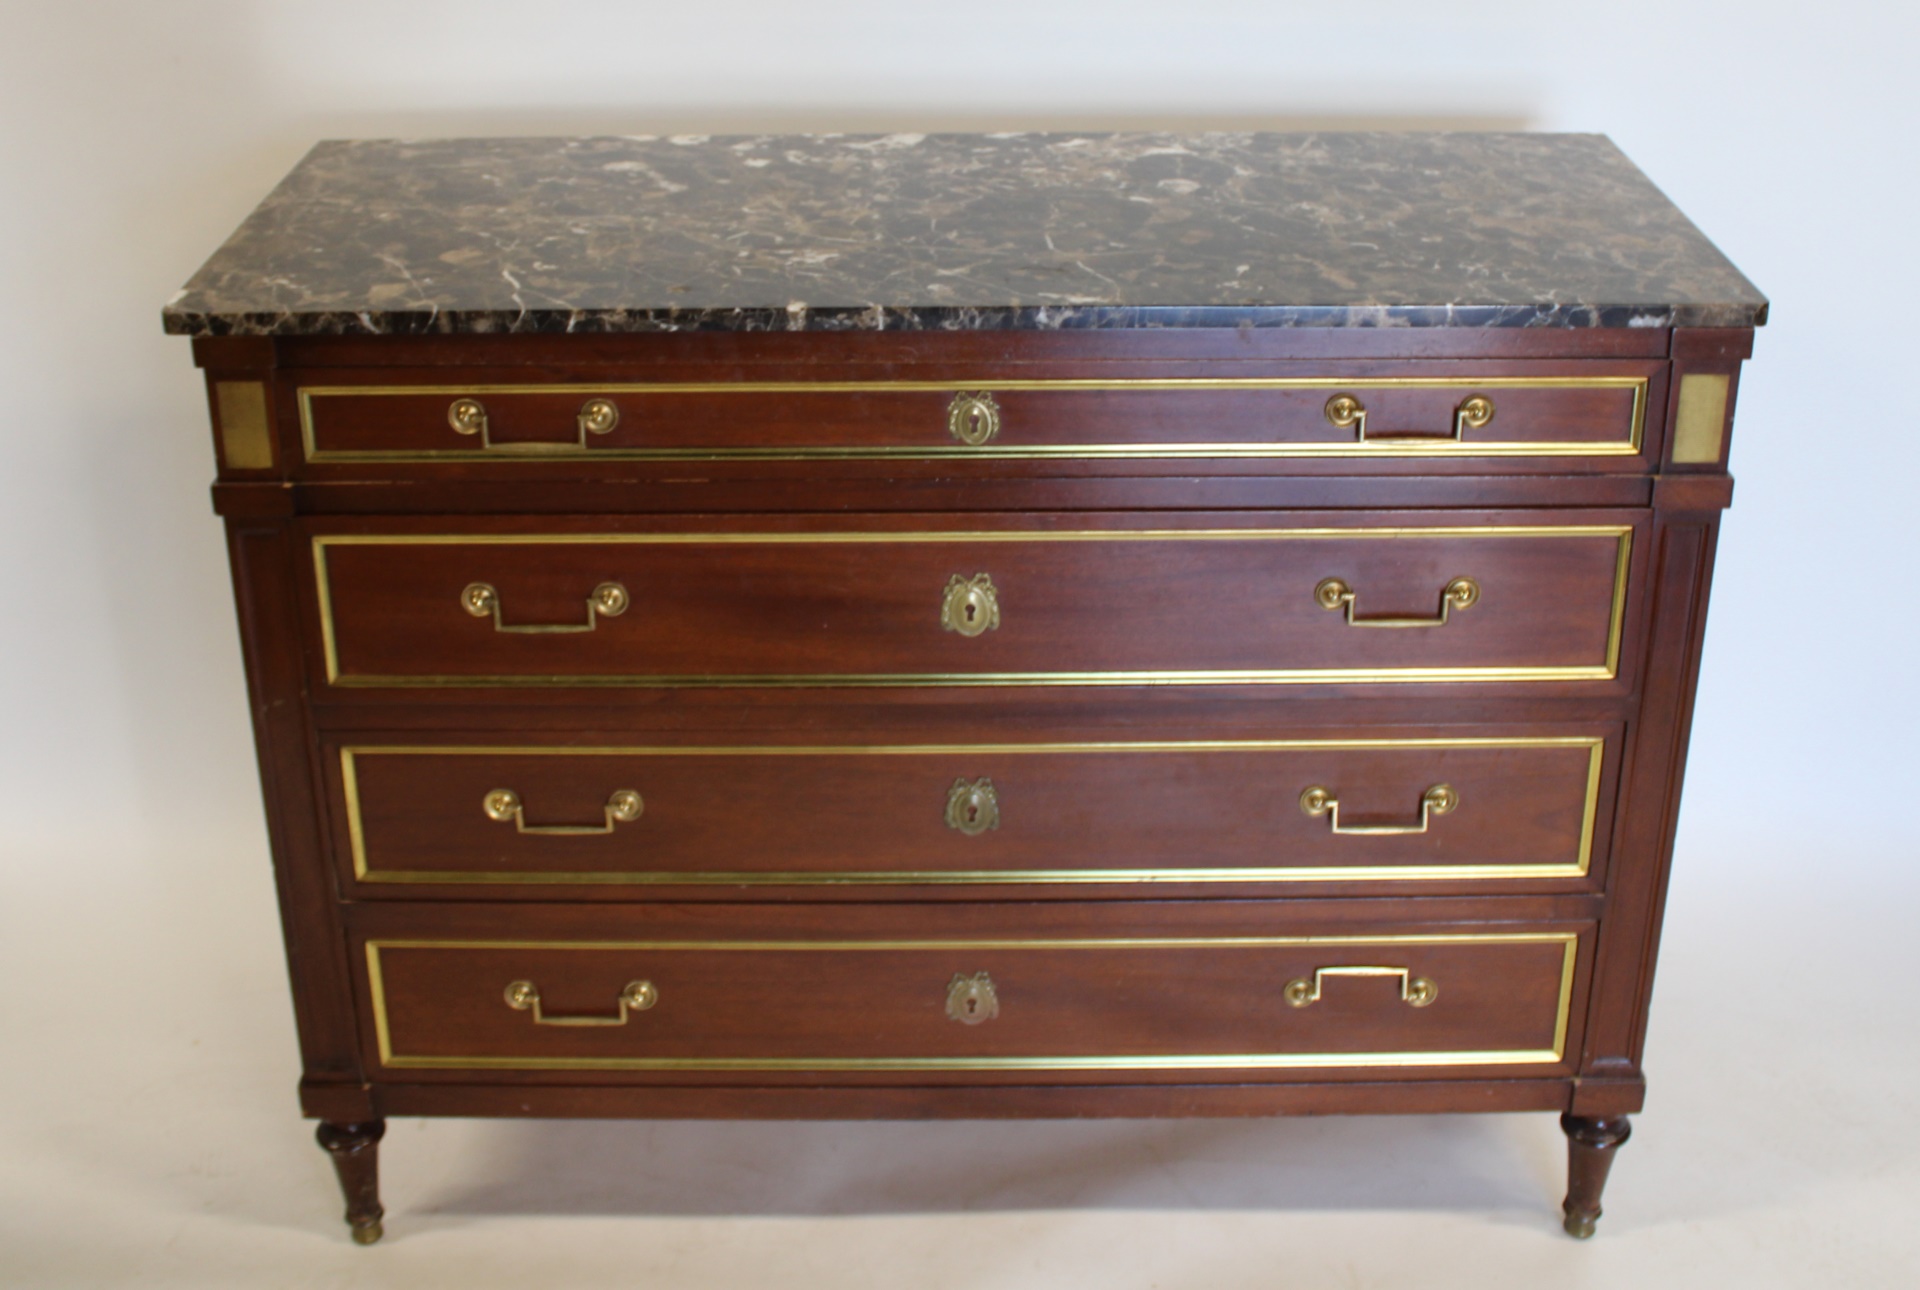 LOUIS PHILIPPE STYLE MAHOGANY MARBLETOP